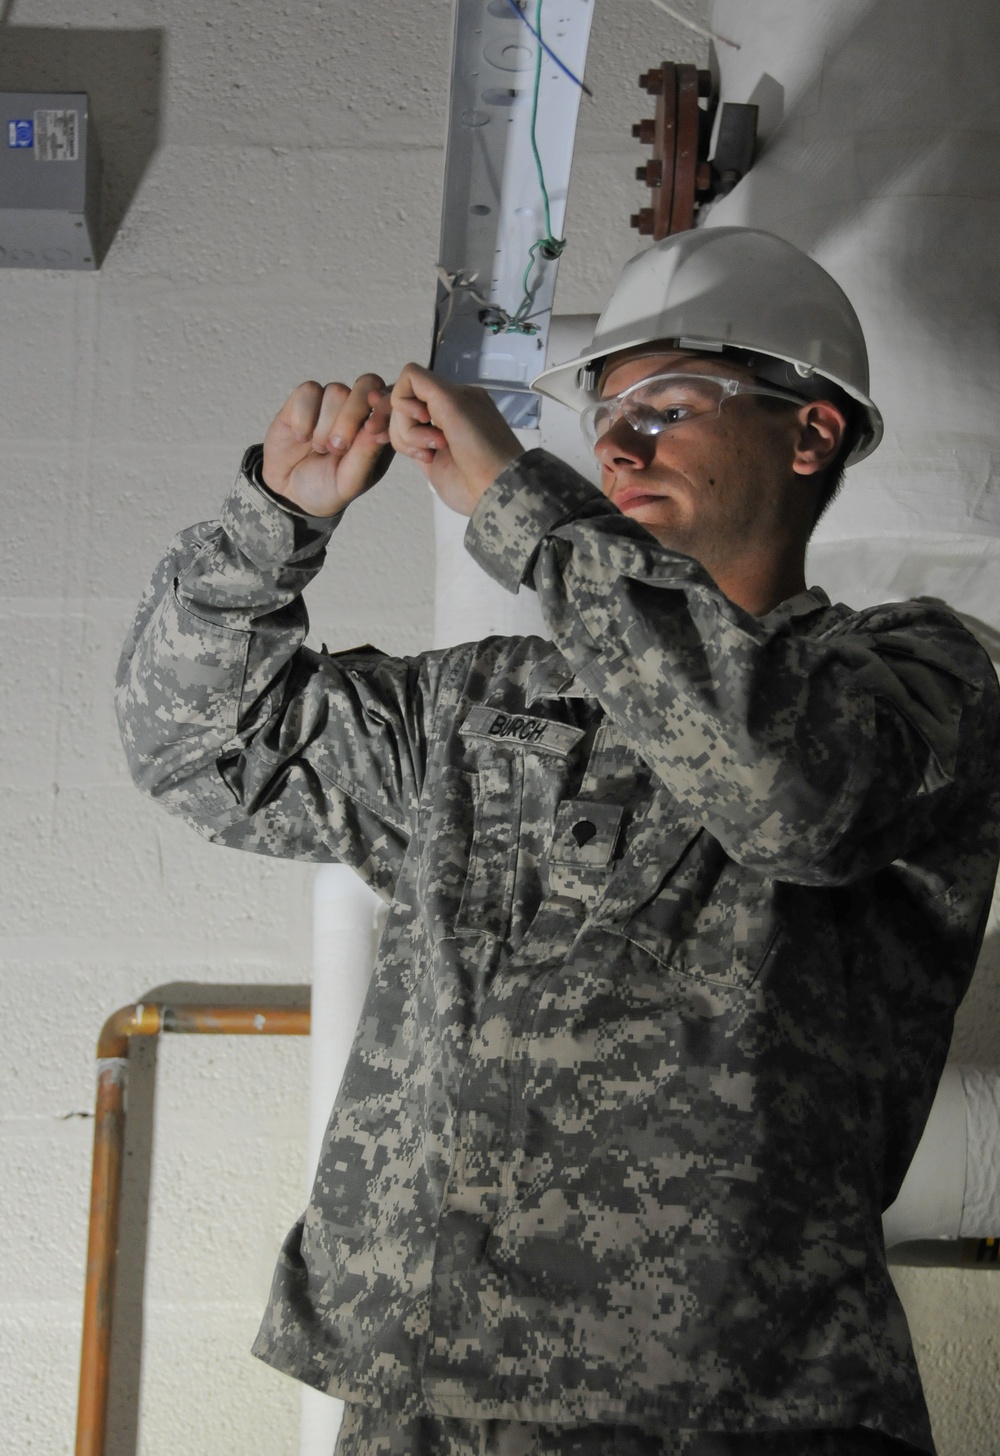 Army Reserve engineers shed new light on training center